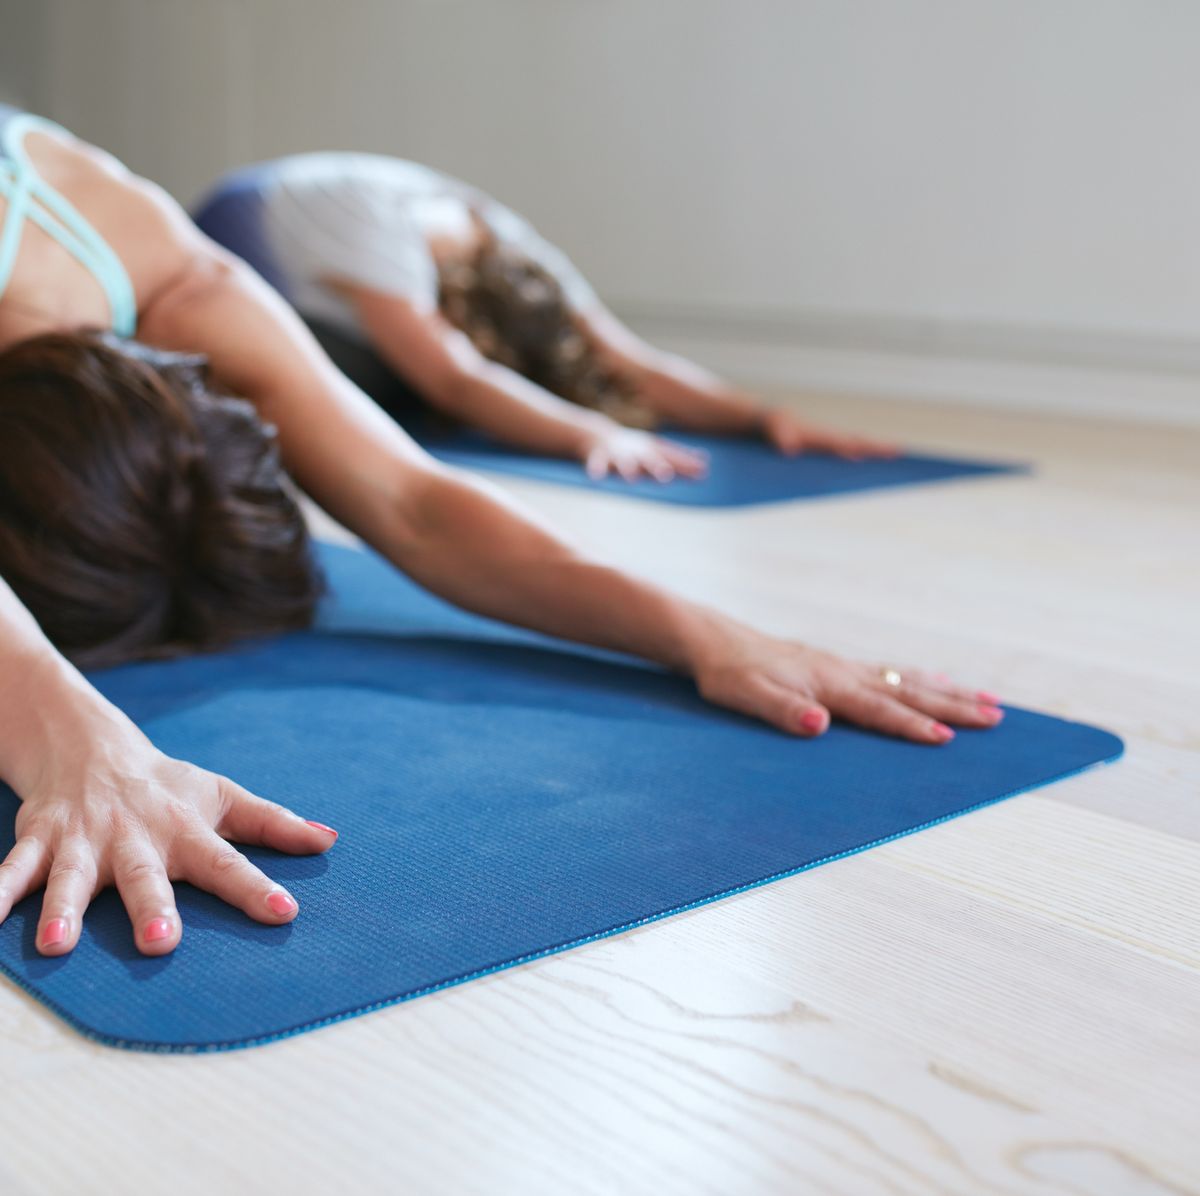 Hatha yoga: Benefits and how to include it in your routine